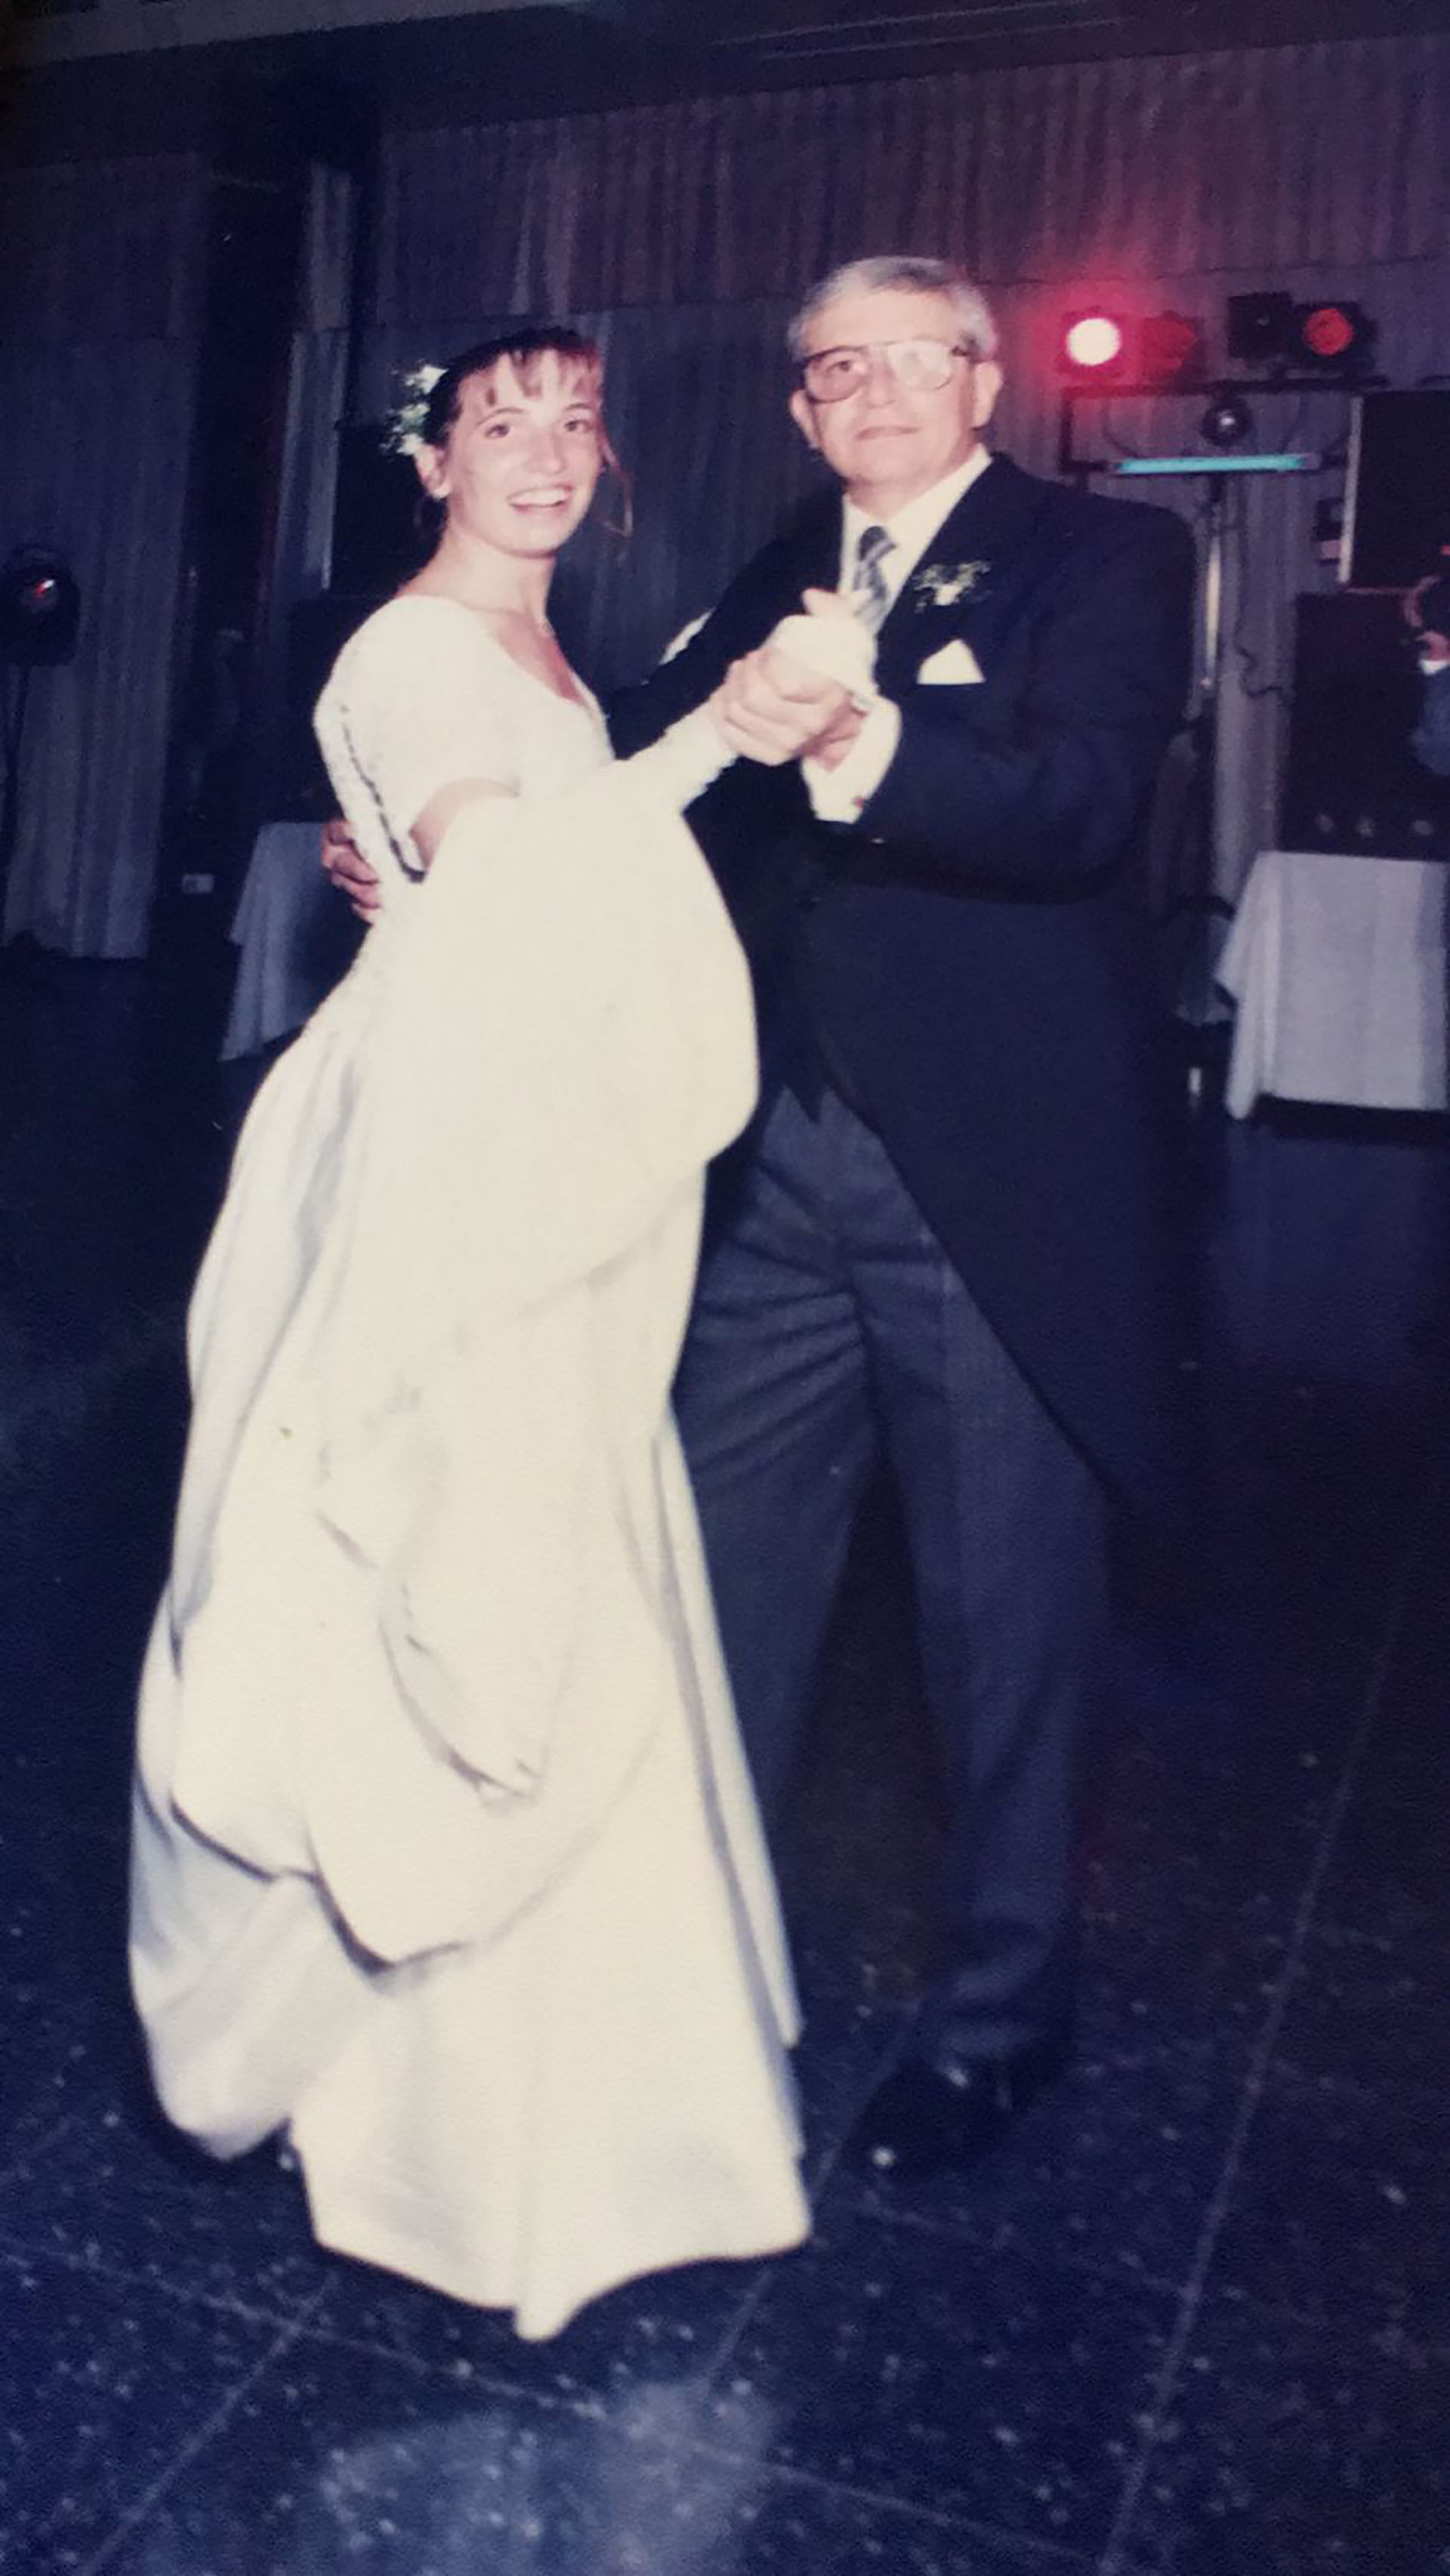 One of his mother's happiest days, dancing the waltz with his father, on his wedding day with the coordinator of Bariloche